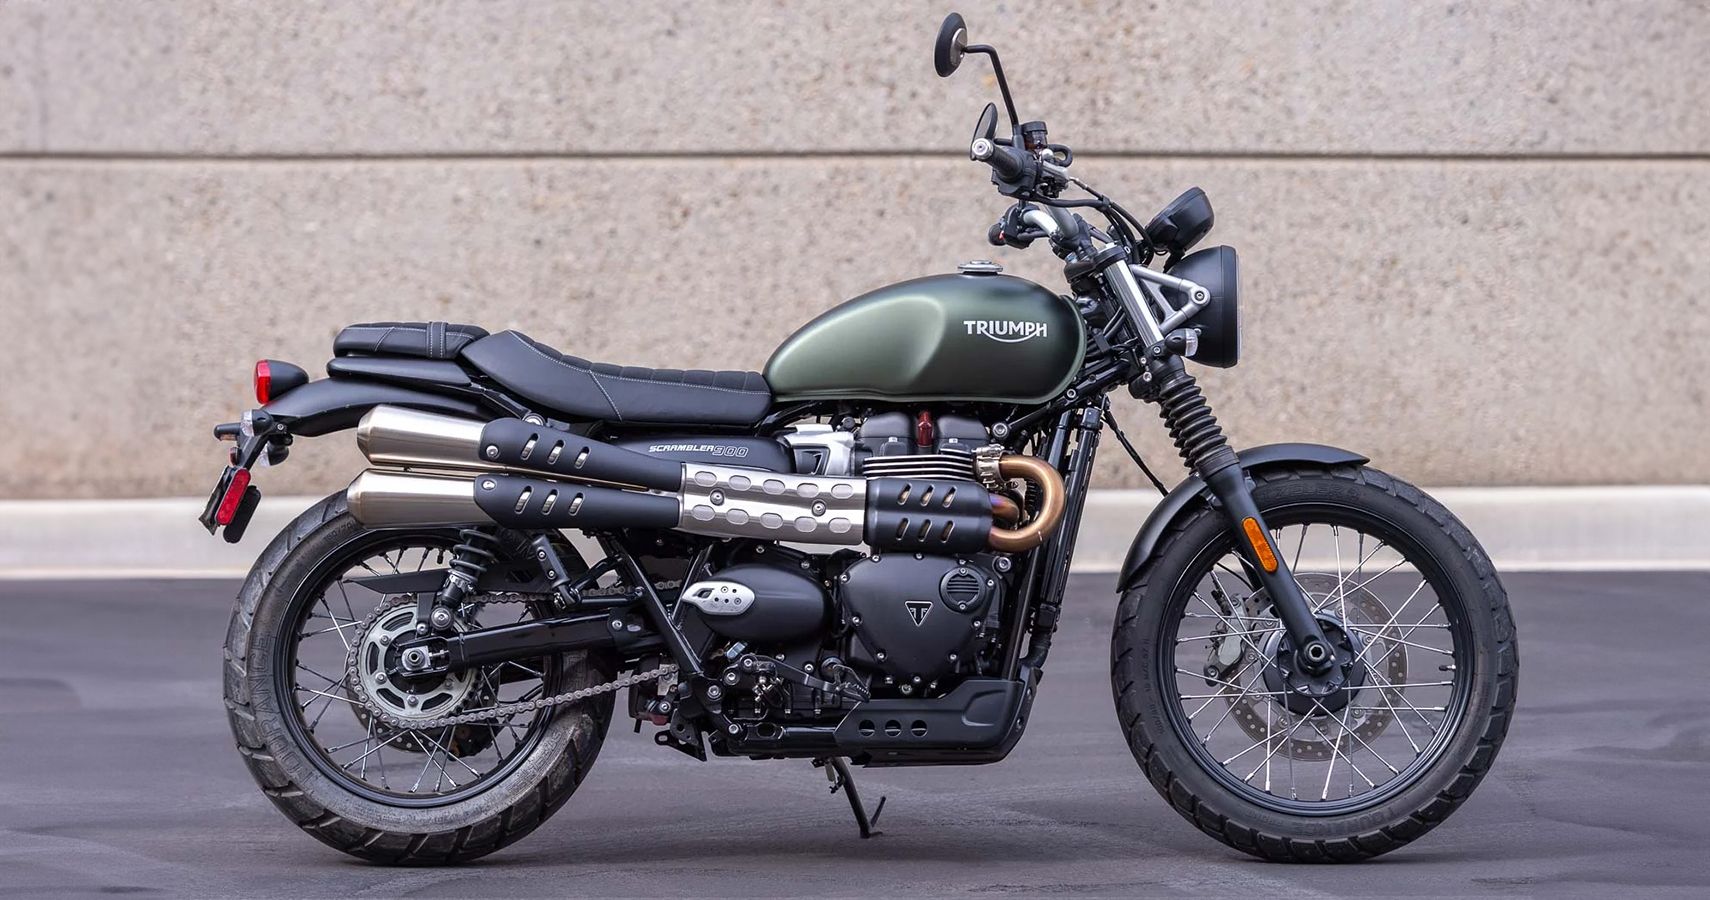 10 Retro Motorcycles That Can Make Anyone Look Cool